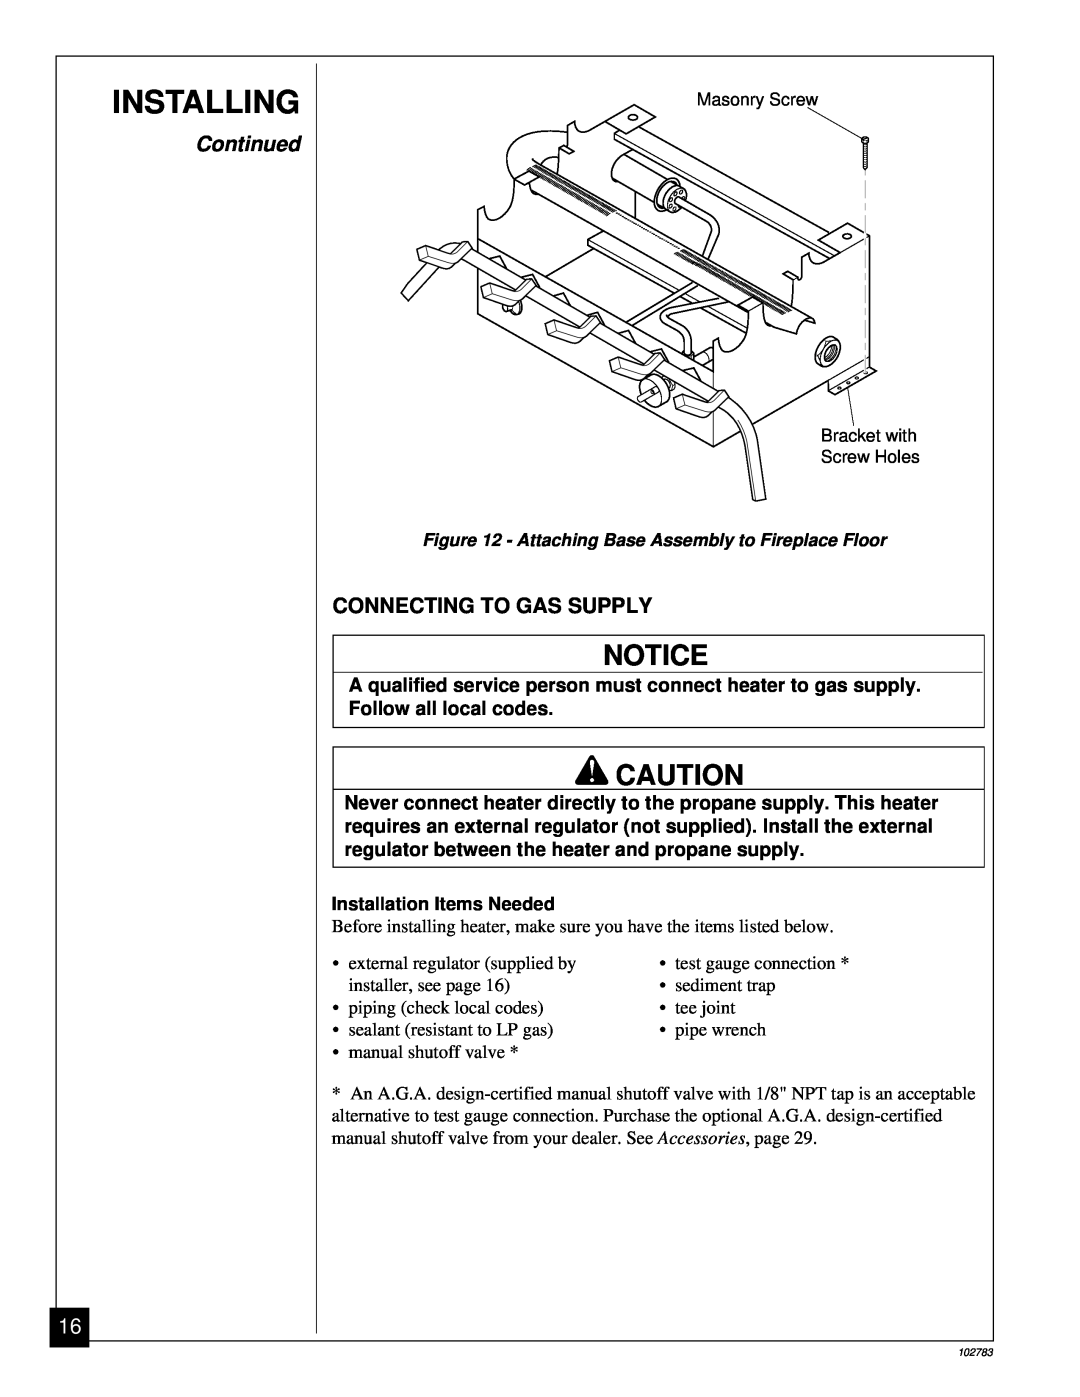 Desa 102783-01B installation manual Installing, Continued, Connecting To Gas Supply, Installation Items Needed 